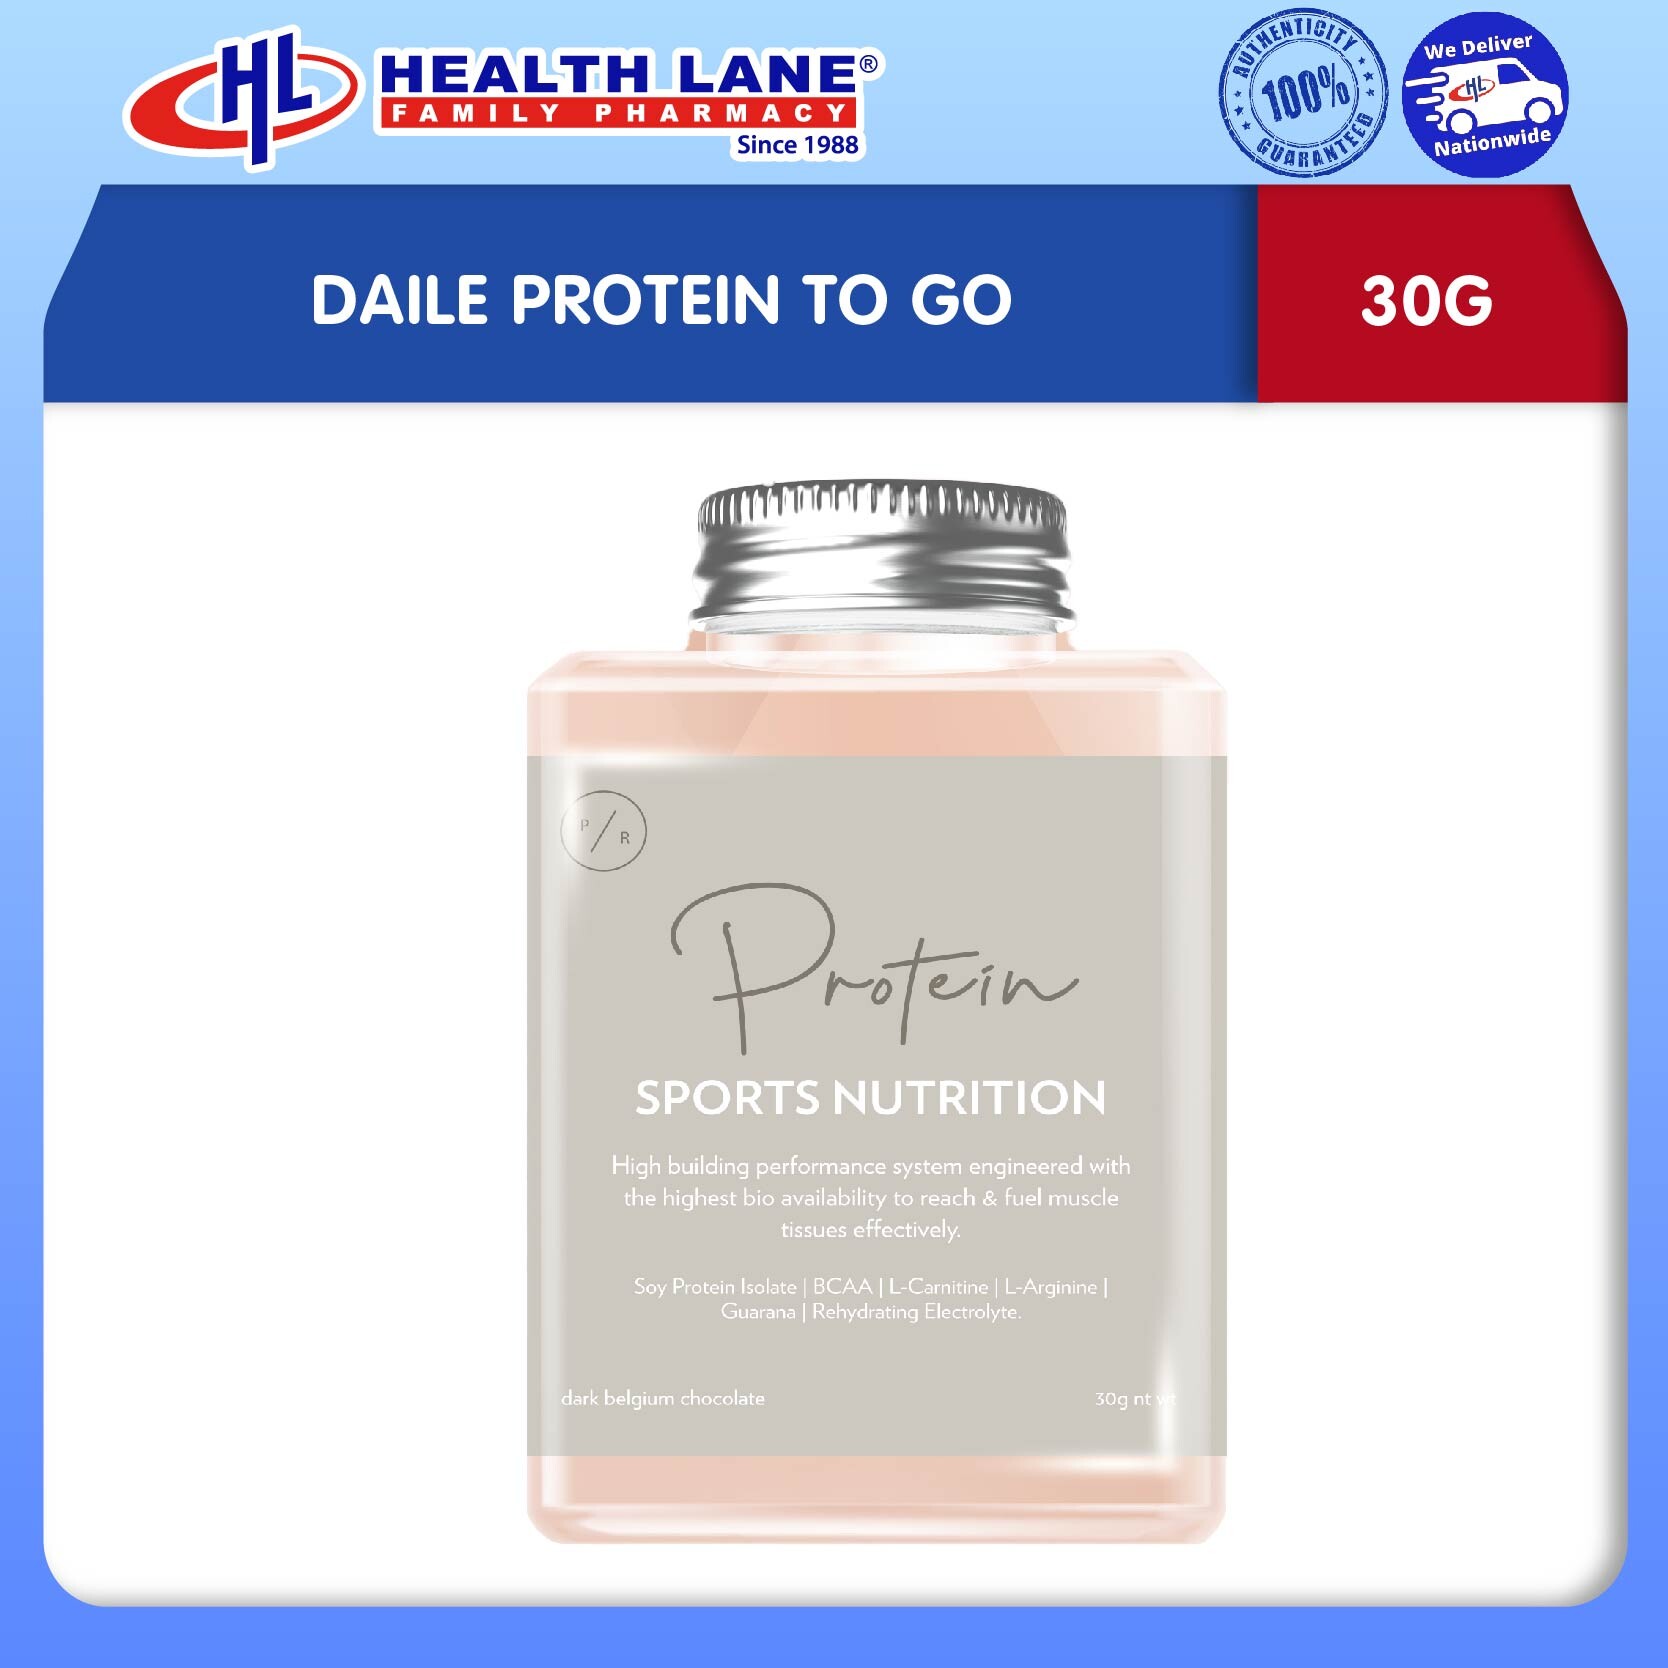 DAILE PROTEIN TO GO (30G)